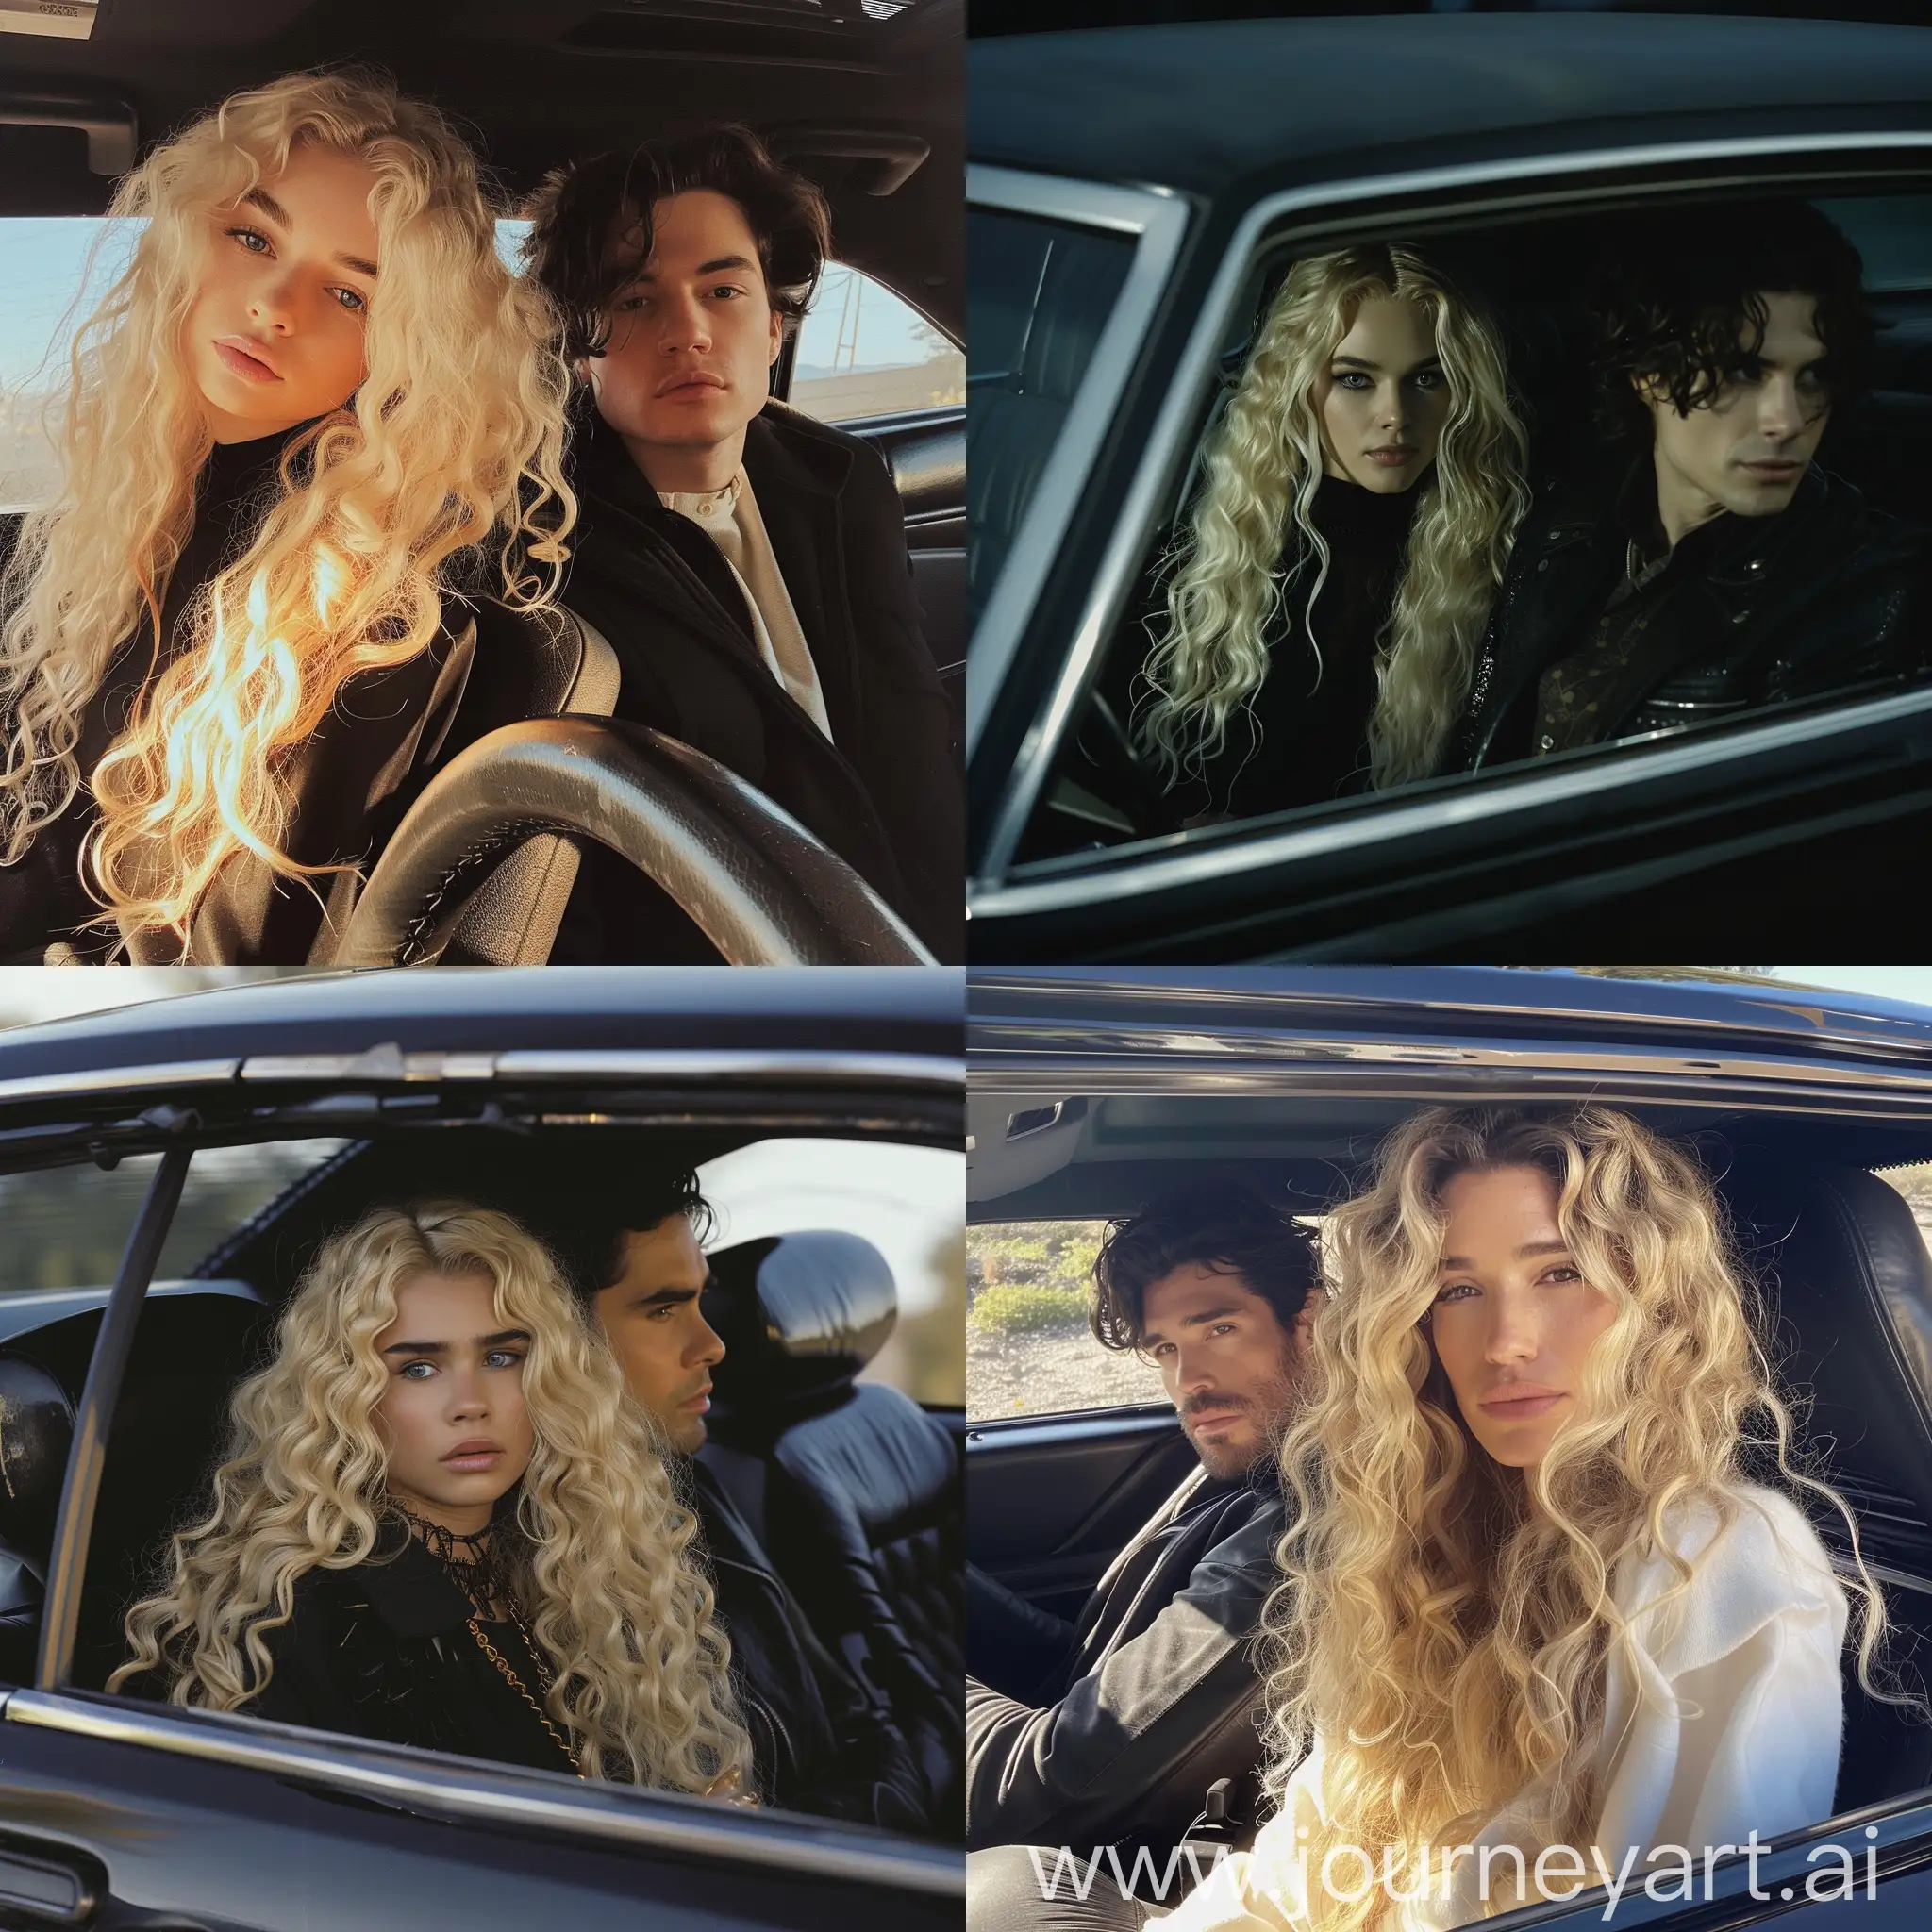 Chic-Blonde-Girl-and-DarkHaired-Man-in-Stylish-Black-Car